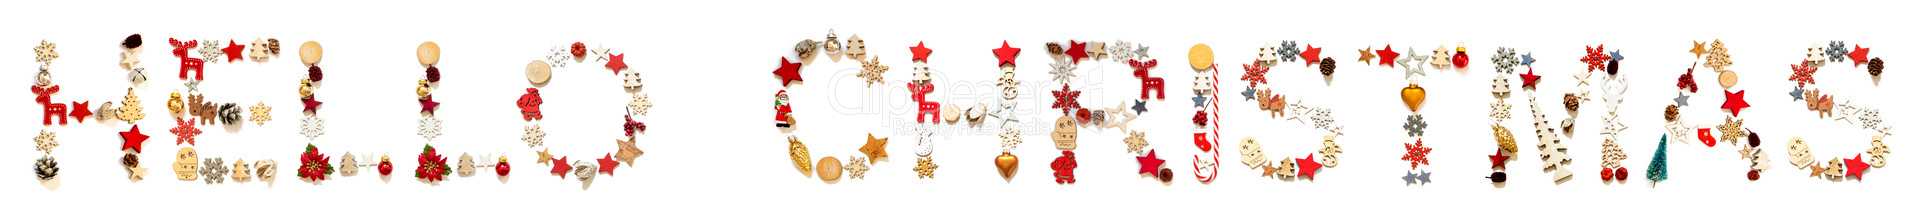 Colorful Christmas Decoration Letter Building Word Hello Christmas